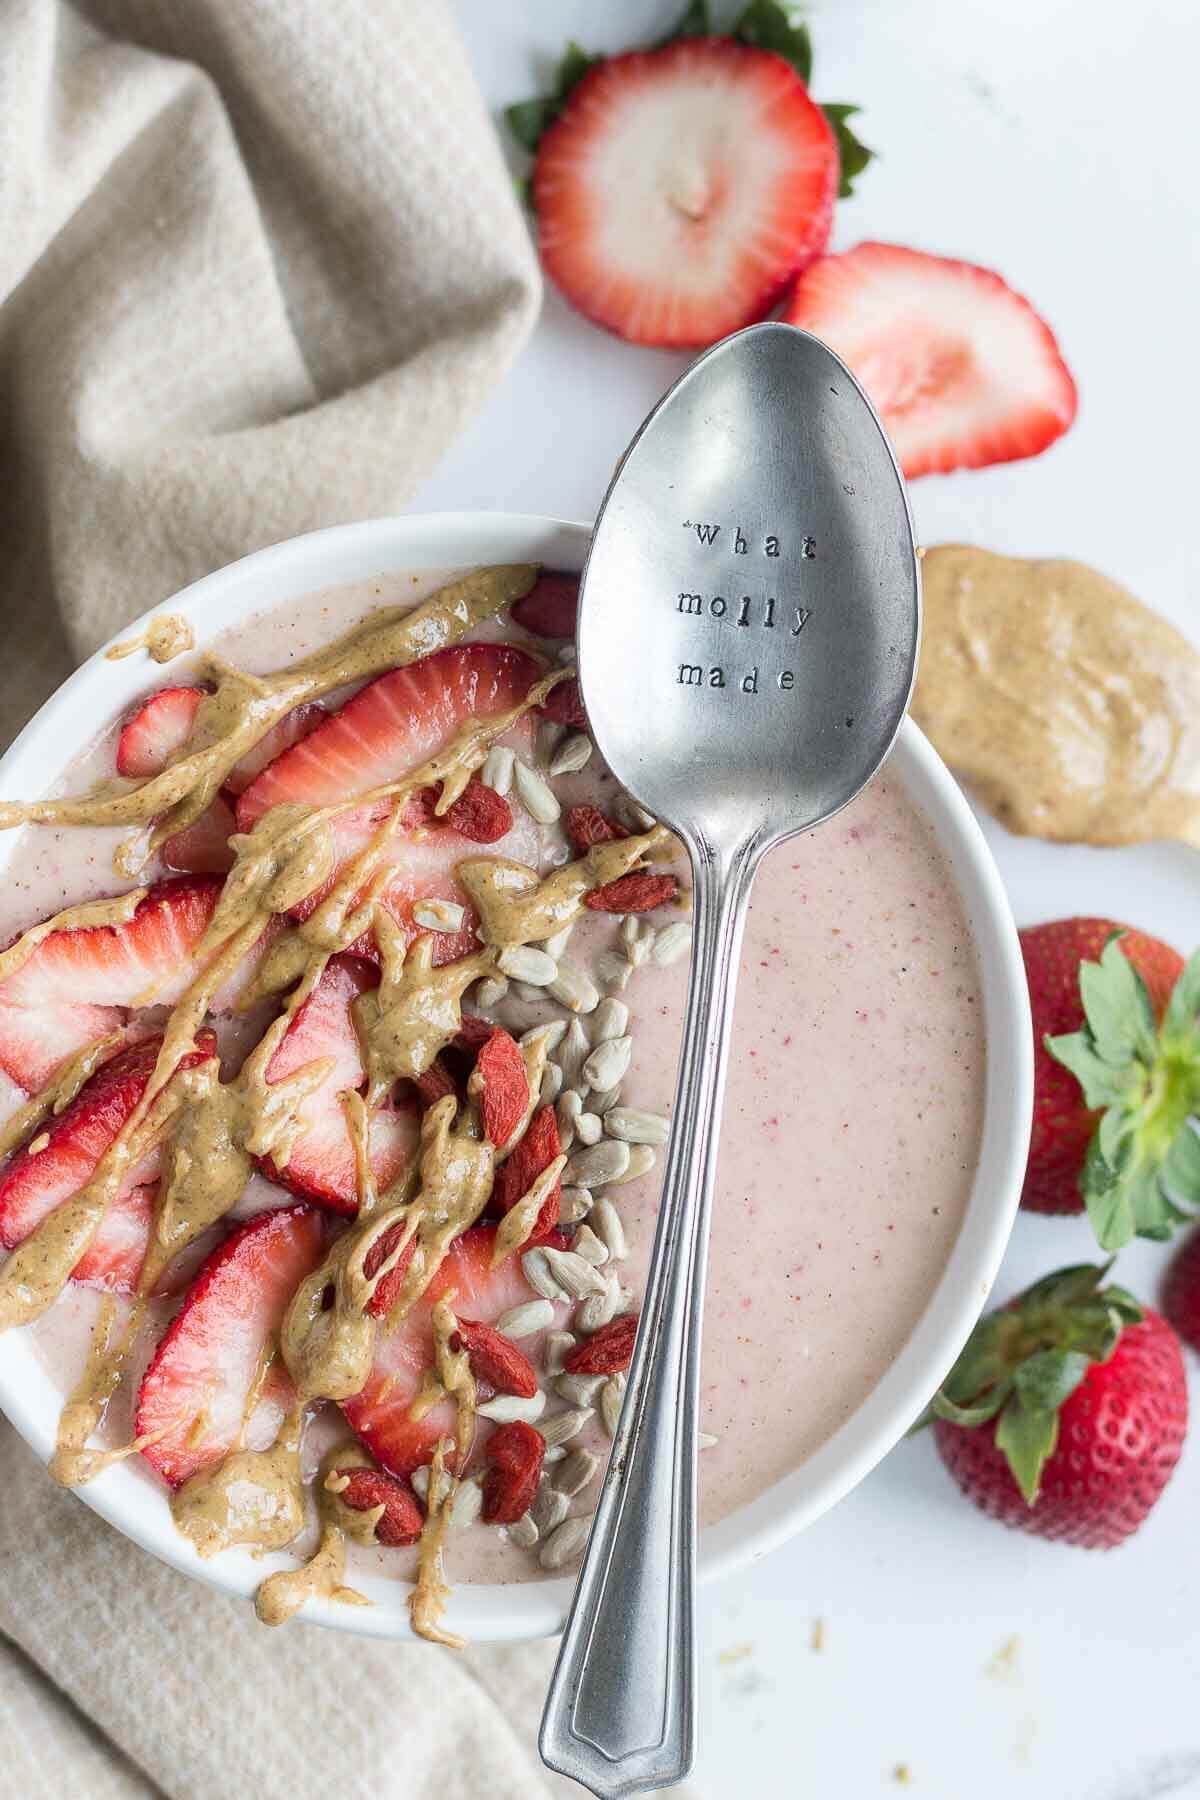 This PB & J Smoothie Bowl is made with fresh, raw ingredients and the perfect recipe to start your morning. The "jelly" comes from the strawberries and the "PB" comes from all natural almond butter! This sweet and satisfying healthy smoothie bowl will become your next go-to.